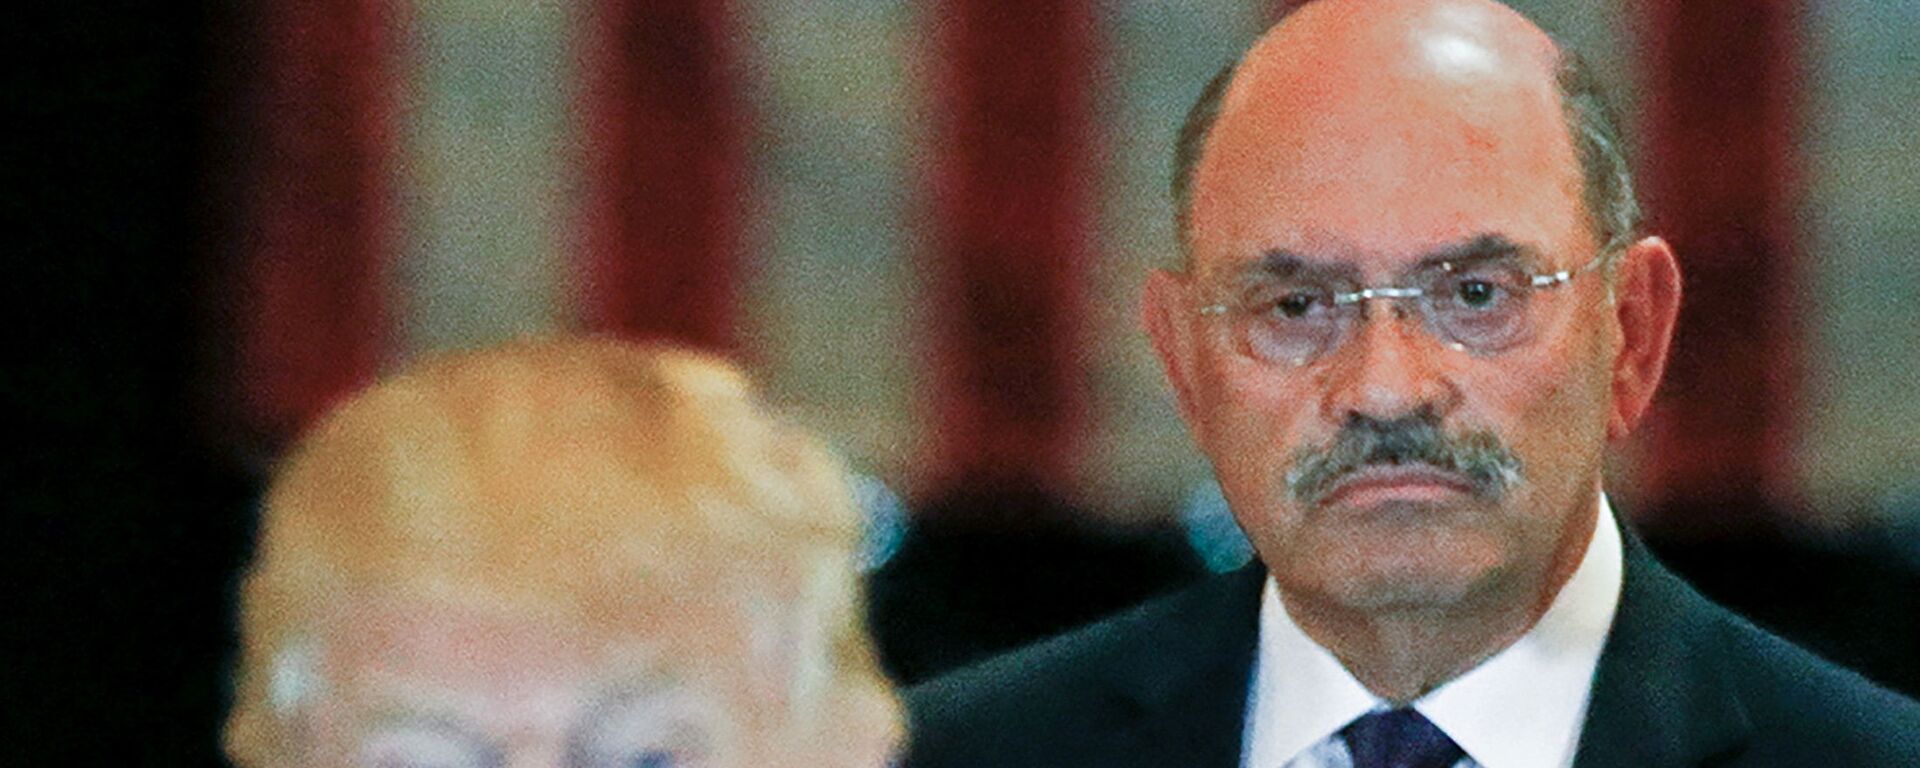 Trump Organization chief financial officer Allen Weisselberg looks on as then-U.S. Republican presidential candidate Donald Trump speaks during a news conference at Trump Tower in Manhattan, New York, U.S., May 31, 2016. - Sputnik International, 1920, 12.07.2021